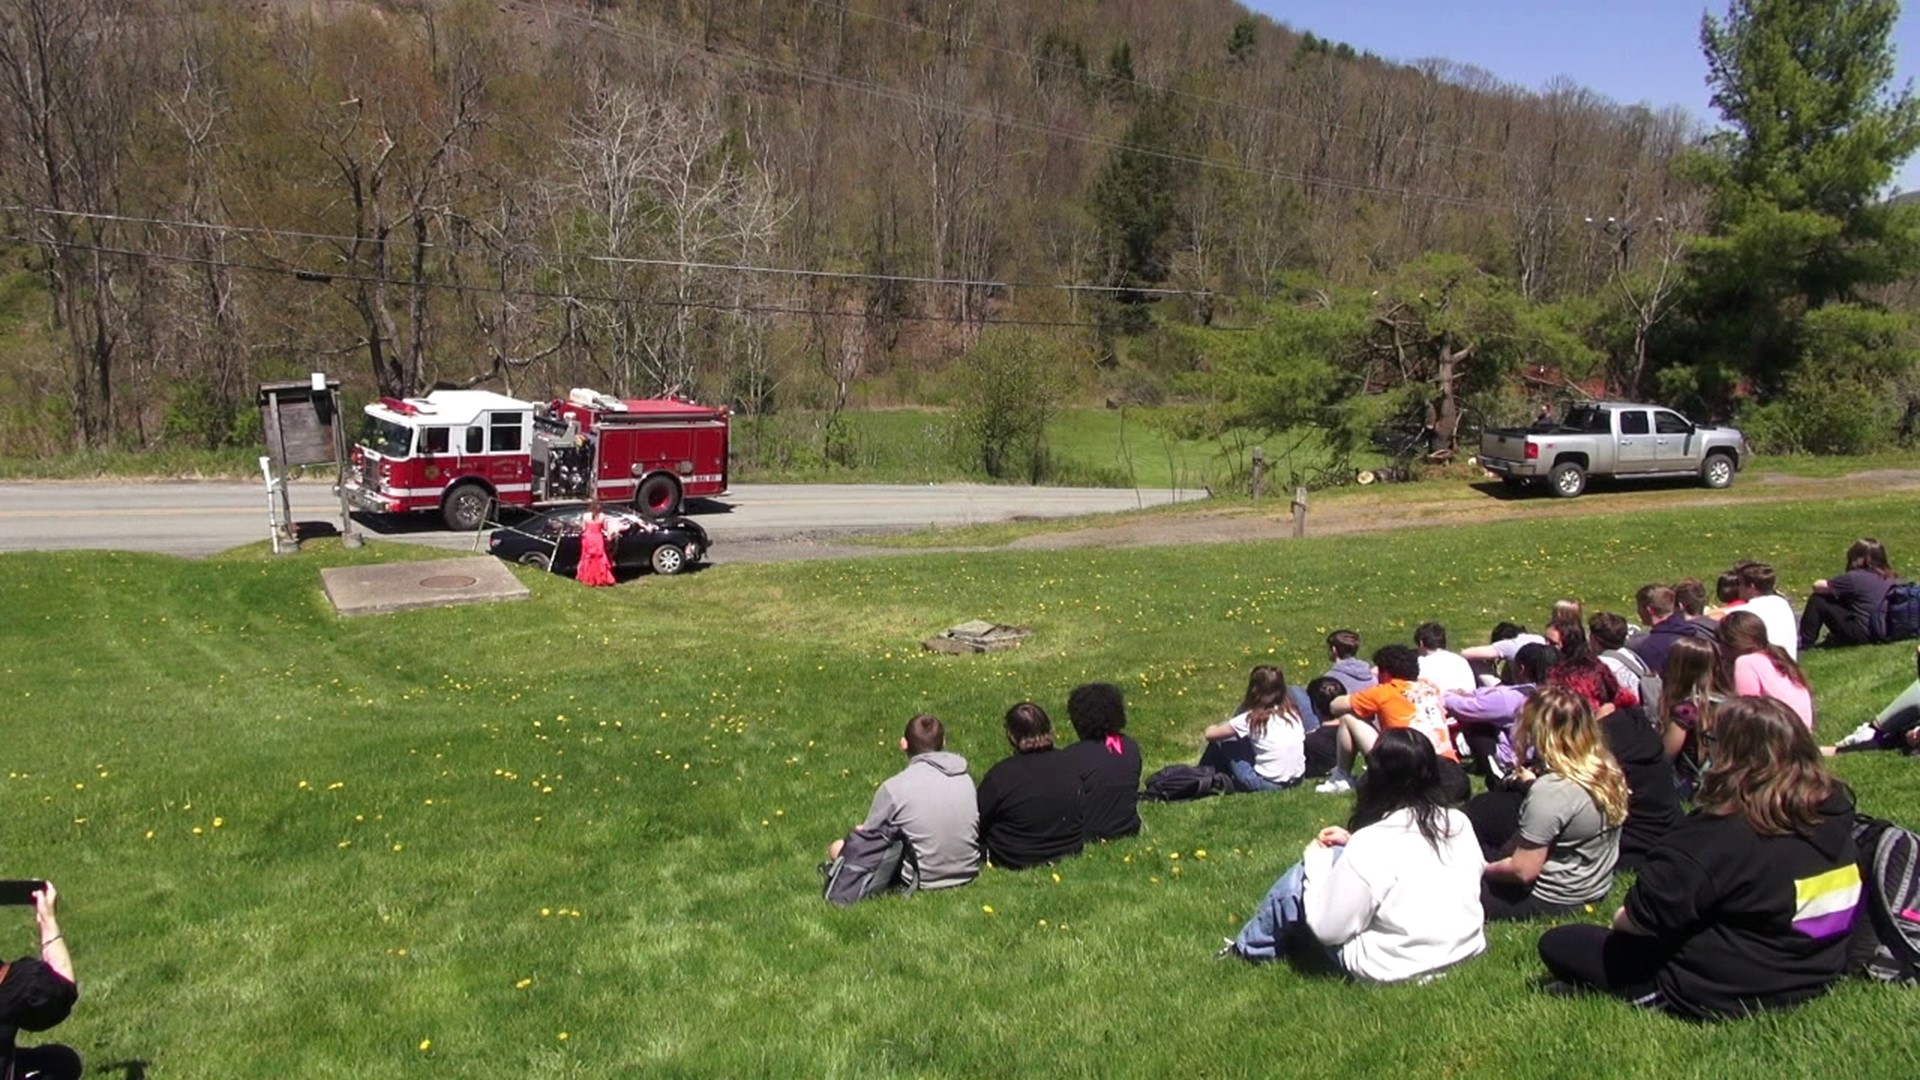 Blue Ridge High School near New Milford conducted the staged accident on Monday with the hope that it will encourage students to not drink and drive.